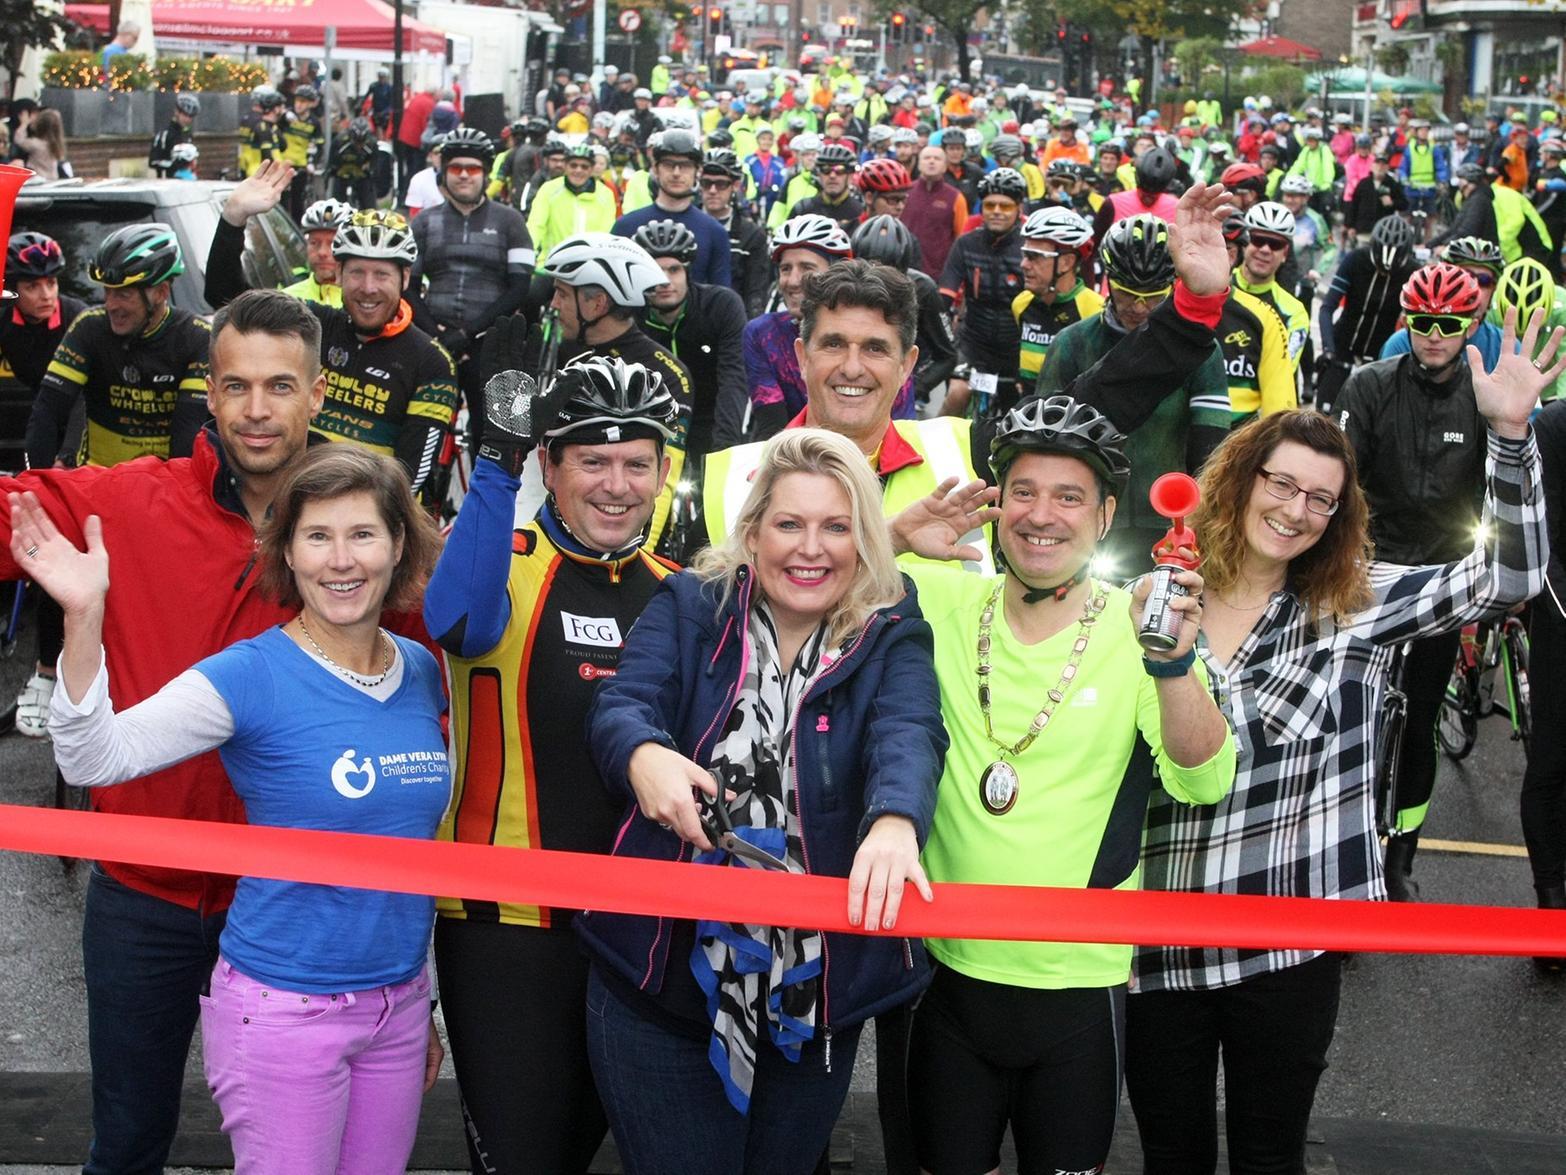 HaywardsHeath Bike Ride will not happen in 2020. To find out more, read our story: https://www.midsussextimes.co.uk/news/people/haywards-heath-and-burgess-hill-bike-rides-postponed-until-2021-1363405.